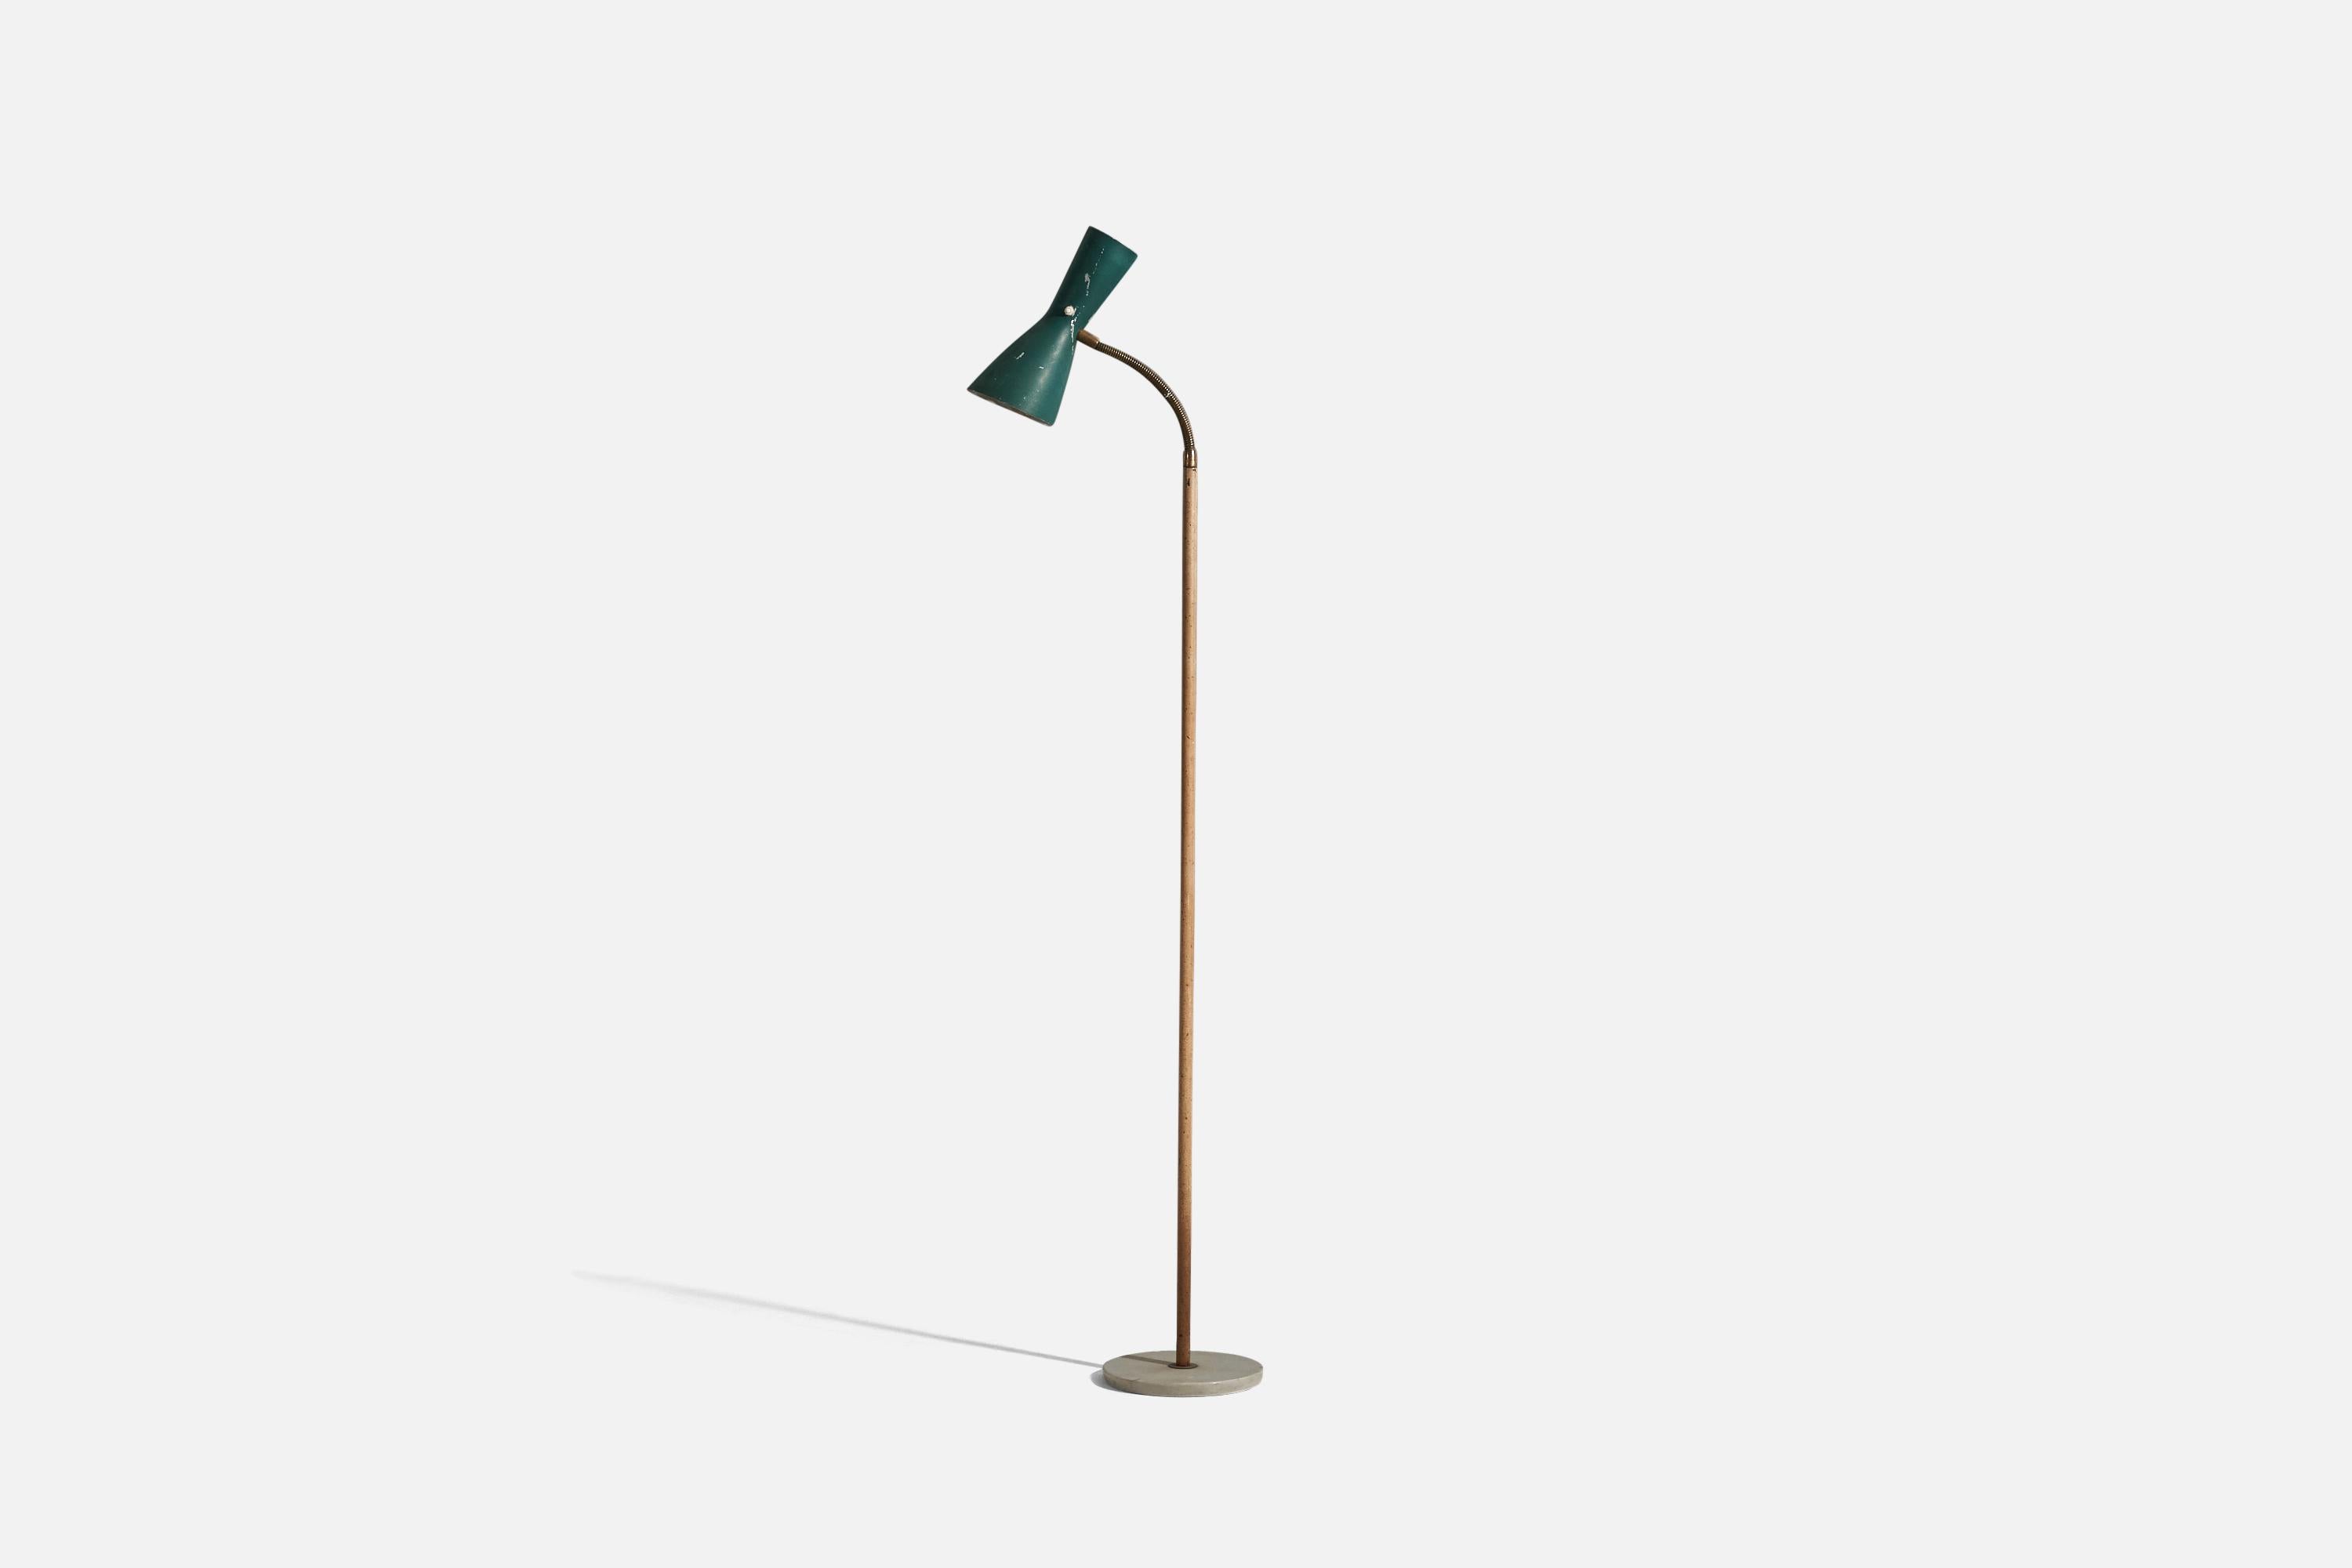 A brass, marble and green lacquered metal floor lamp designed and produced in Italy, c. 1950s.

Sold with lampshade. 
Dimensions stated refer to the floor lamp with the shade. 

Variable dimensions, measured as illustrated in the first